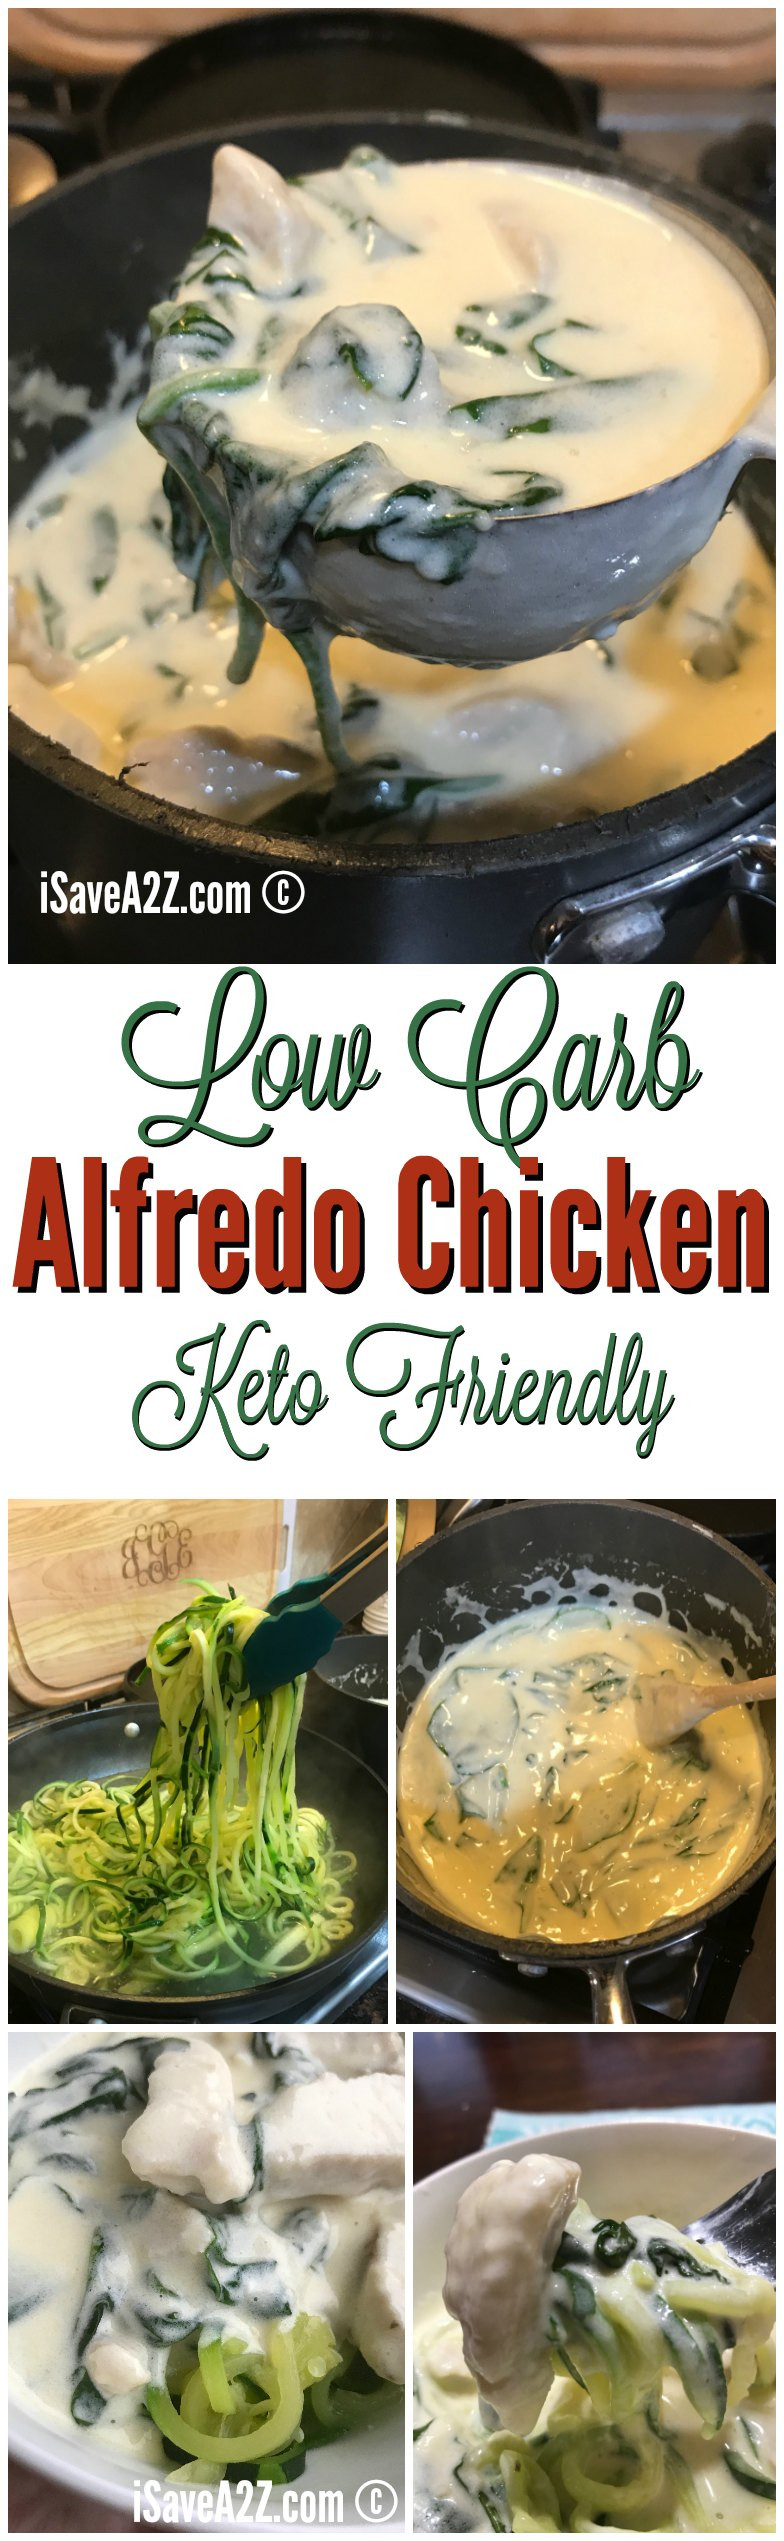 Canned Chicken Recipes Low Carb
 Low Carb and Keto Chicken Alfredo Pasta Recipe iSaveA2Z